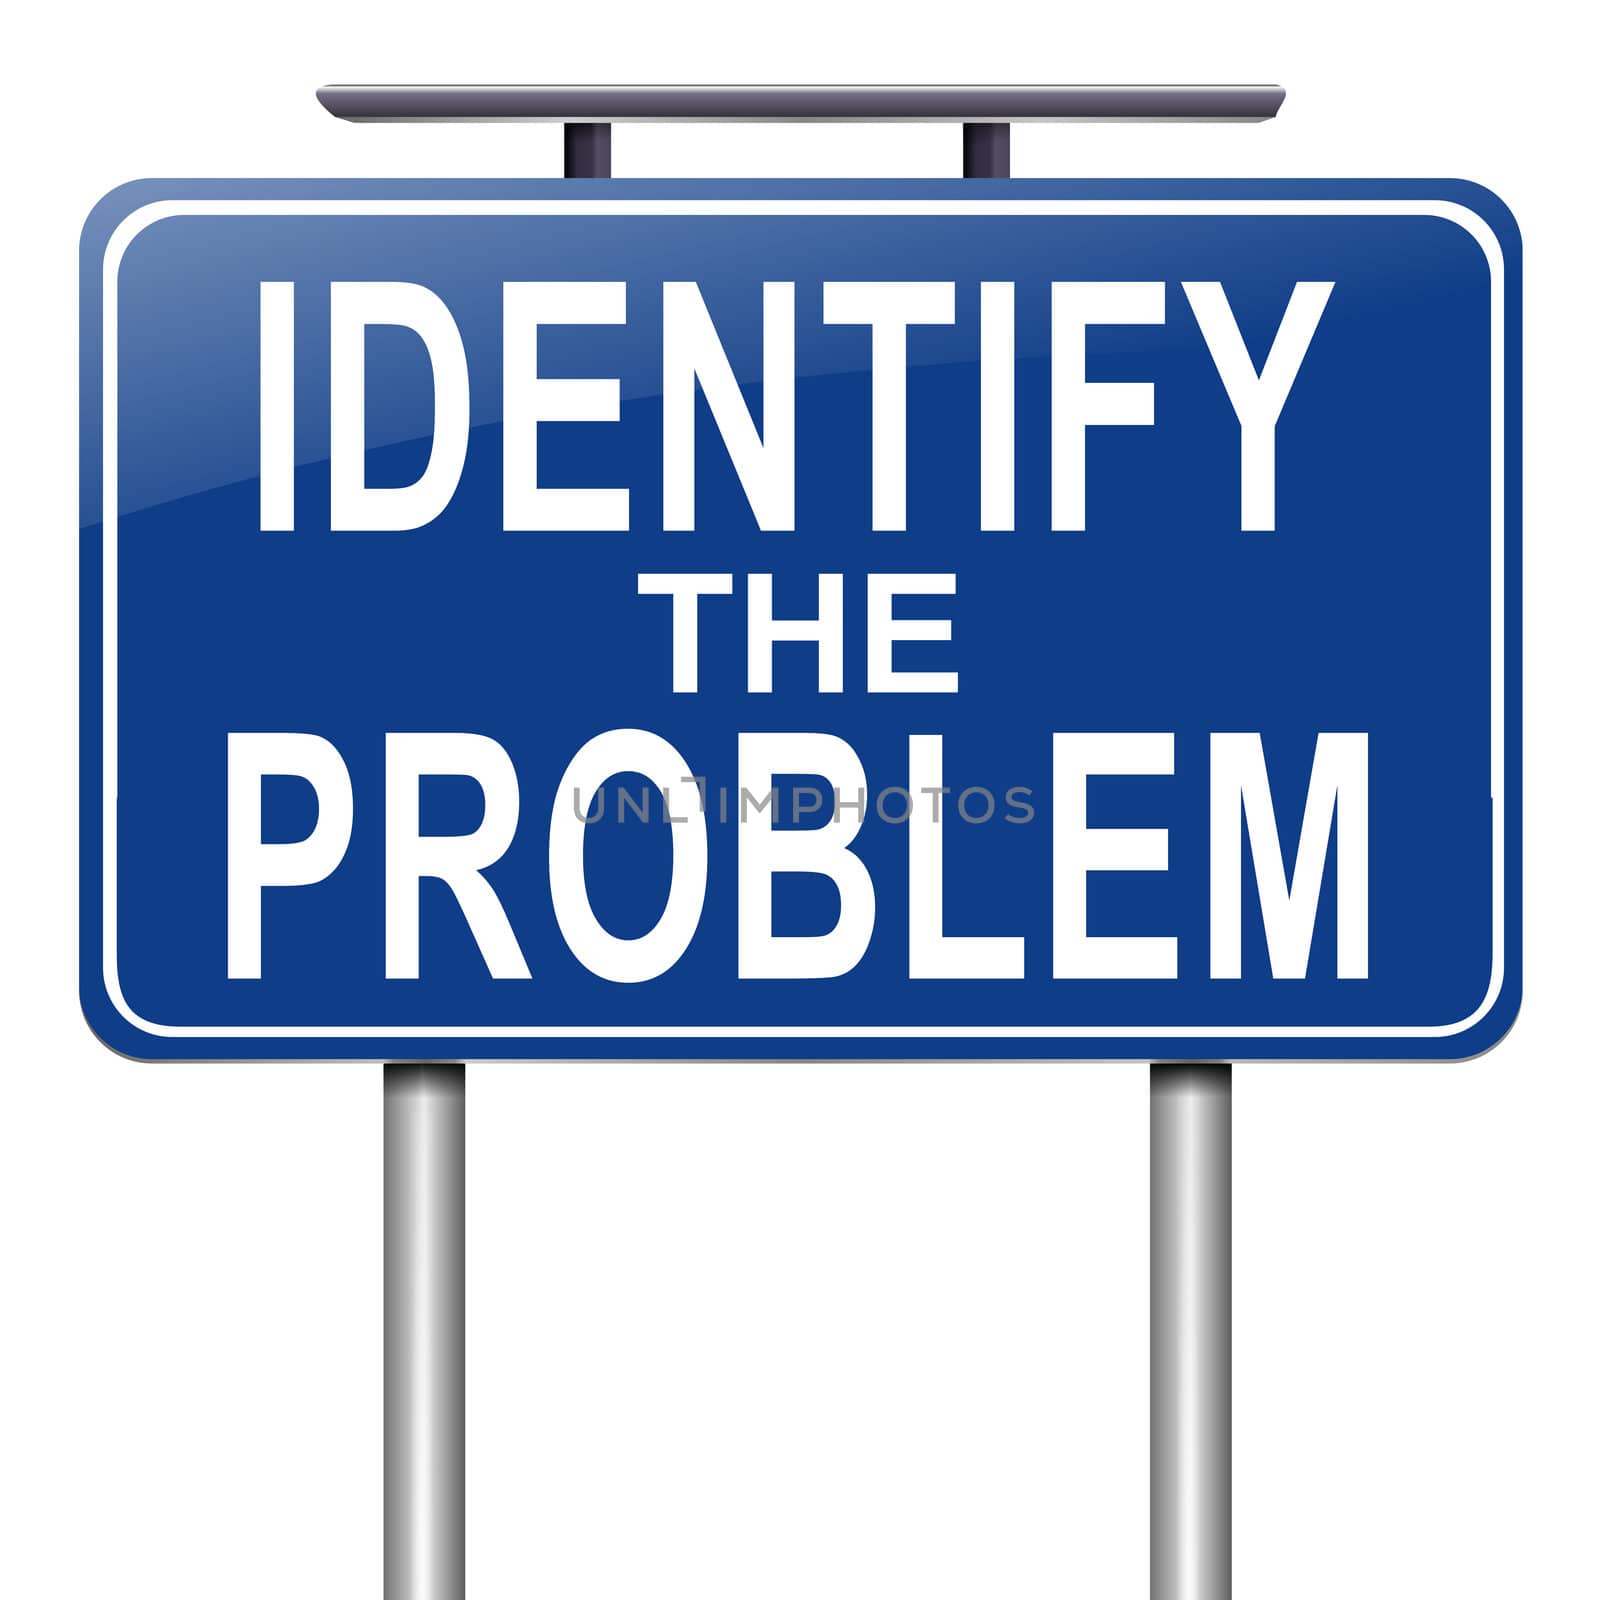 Illustration depicting a roadsign with an identify the problem concept. White background.